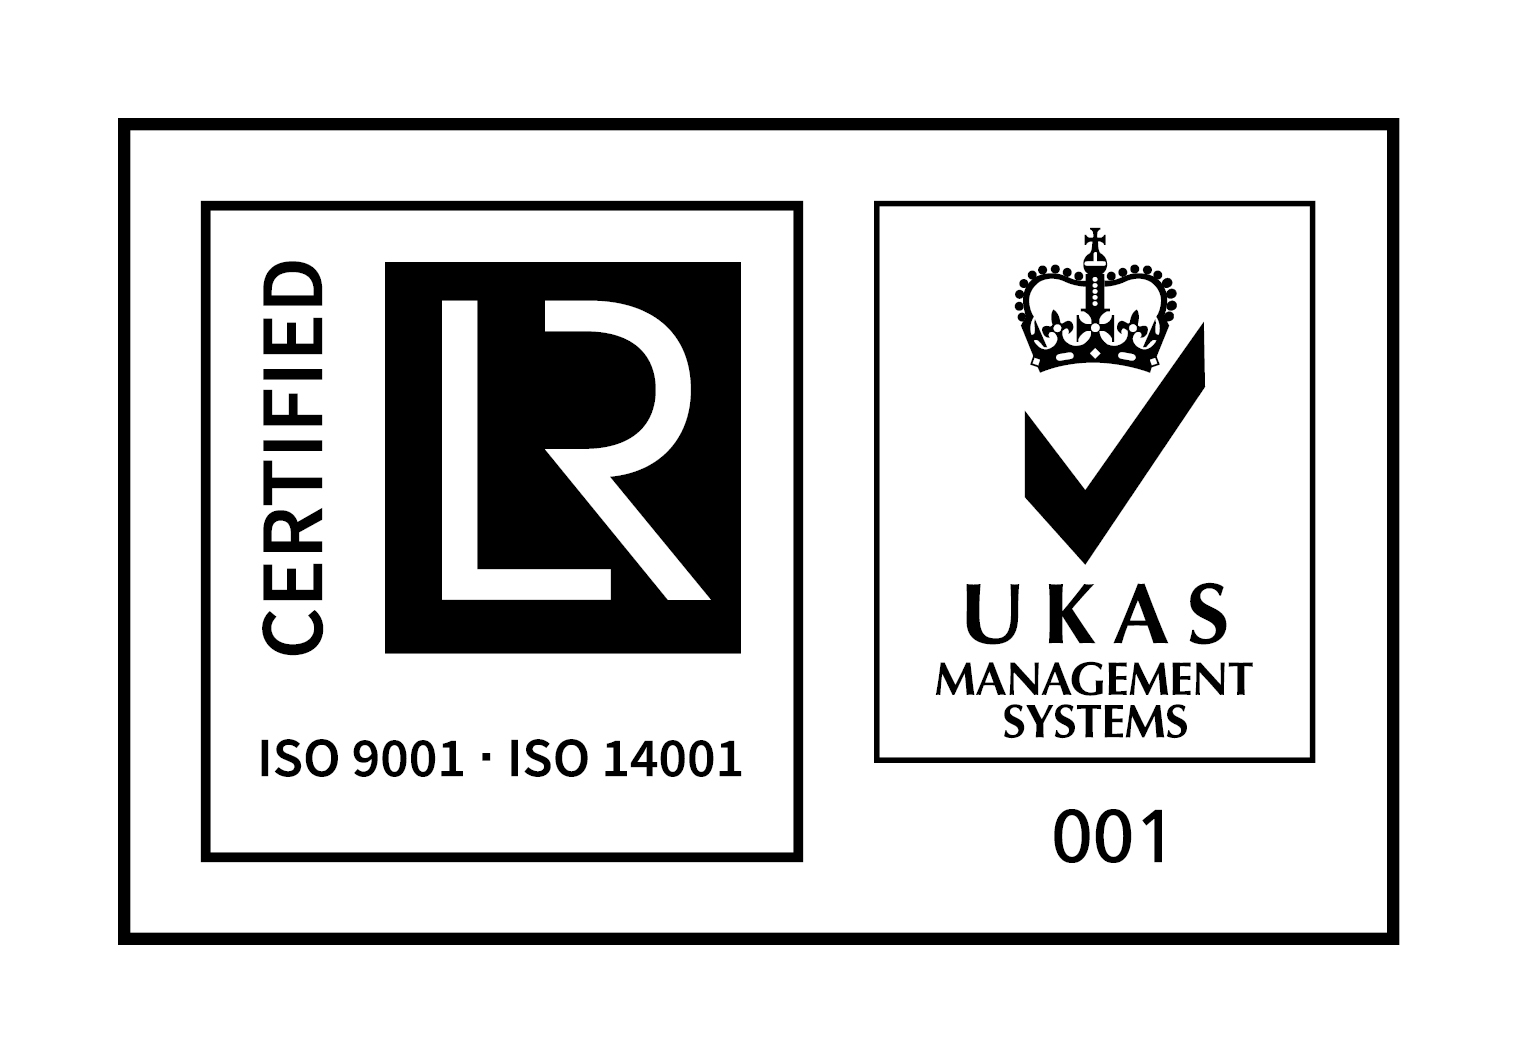 UKAS AND ISO 9001 AND ISO 14001 RGB